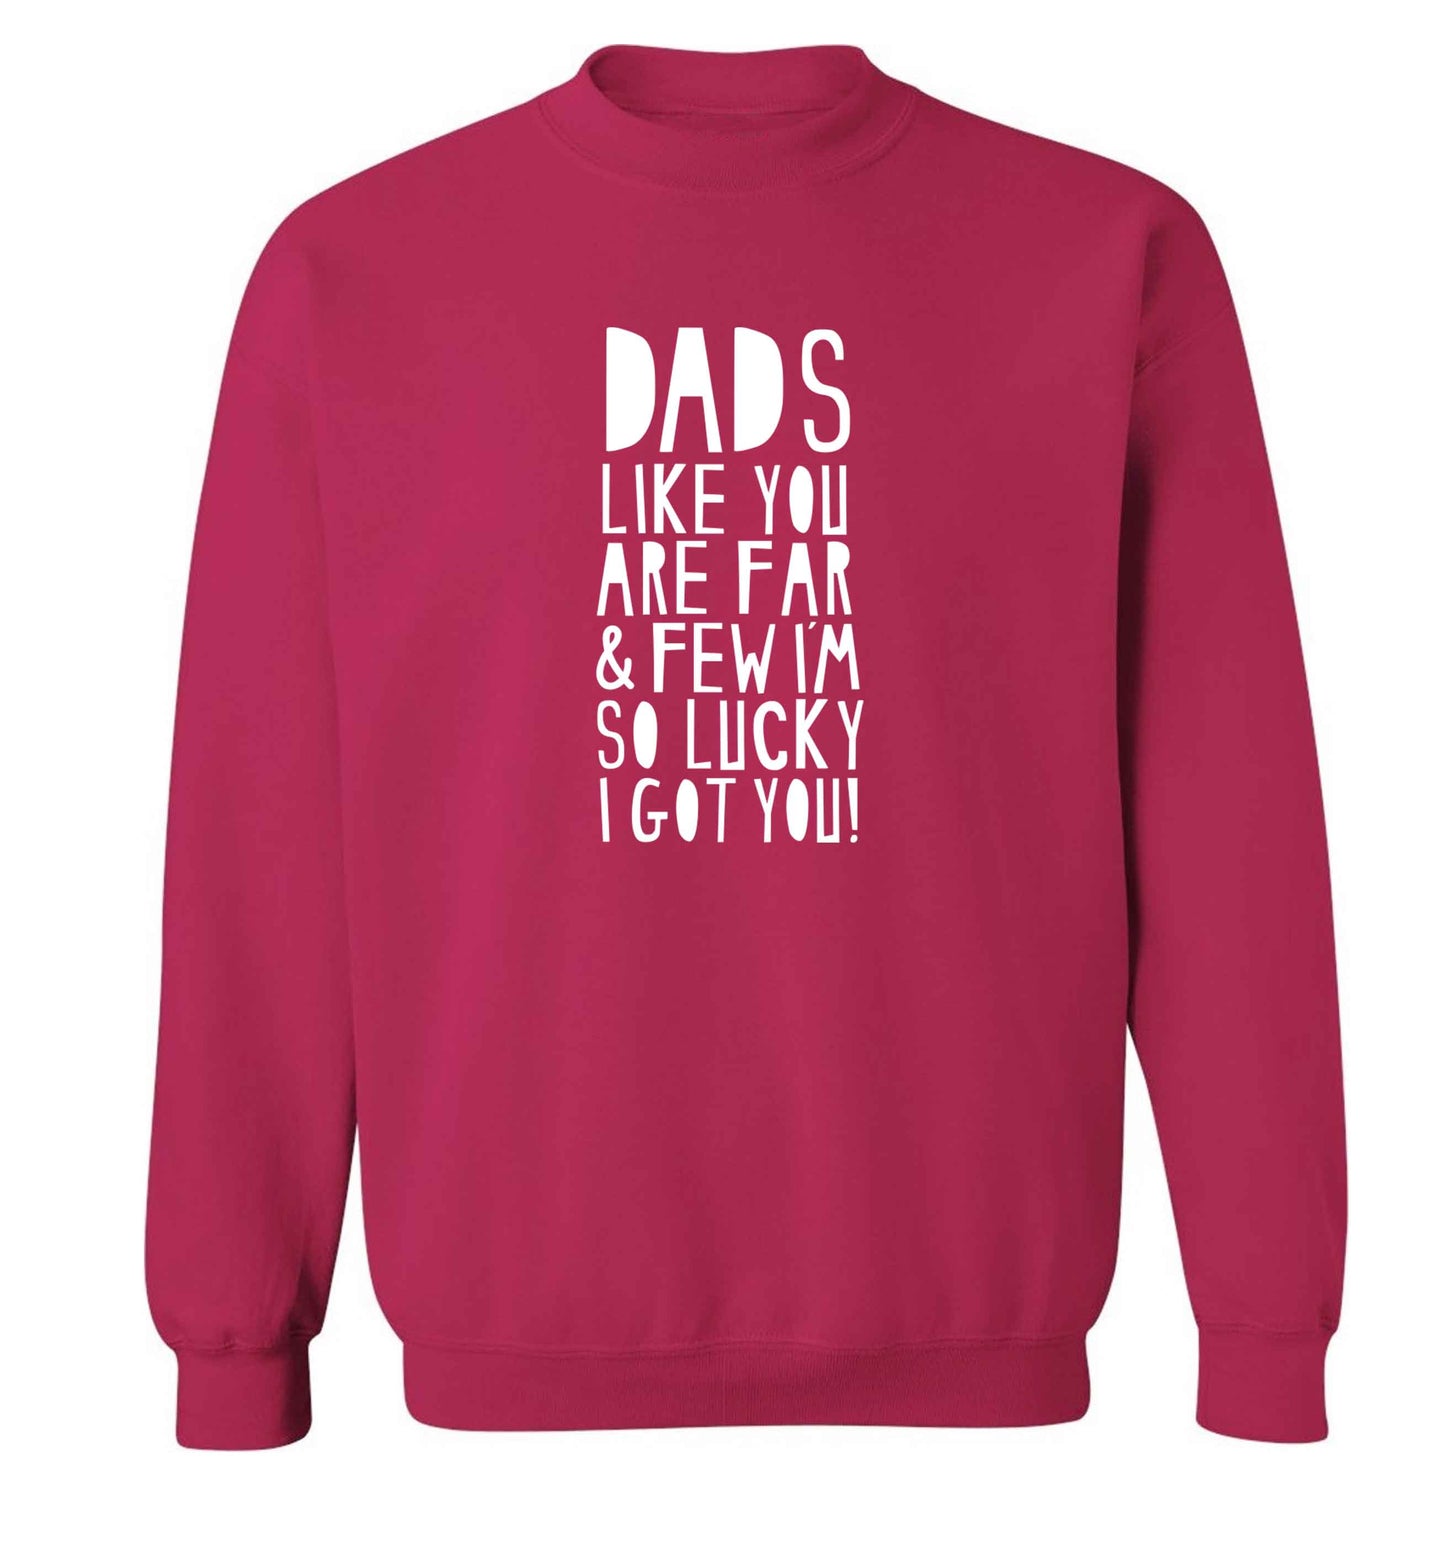 Dads like you are far and few I'm so luck I got you! adult's unisex pink sweater 2XL